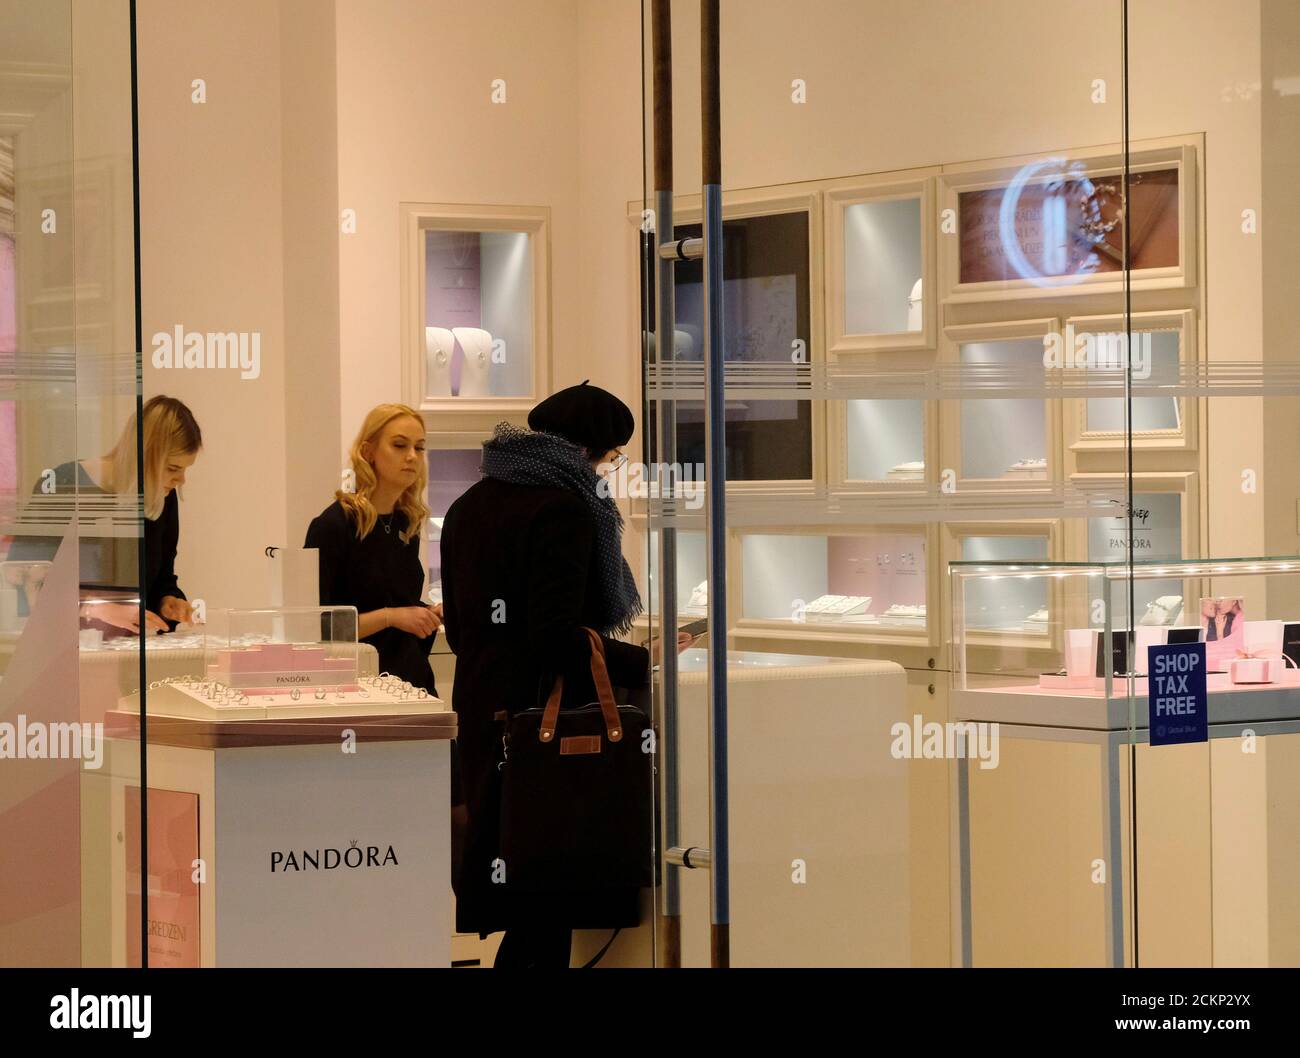 Pandora Shop High Resolution Stock Photography and Images - Alamy